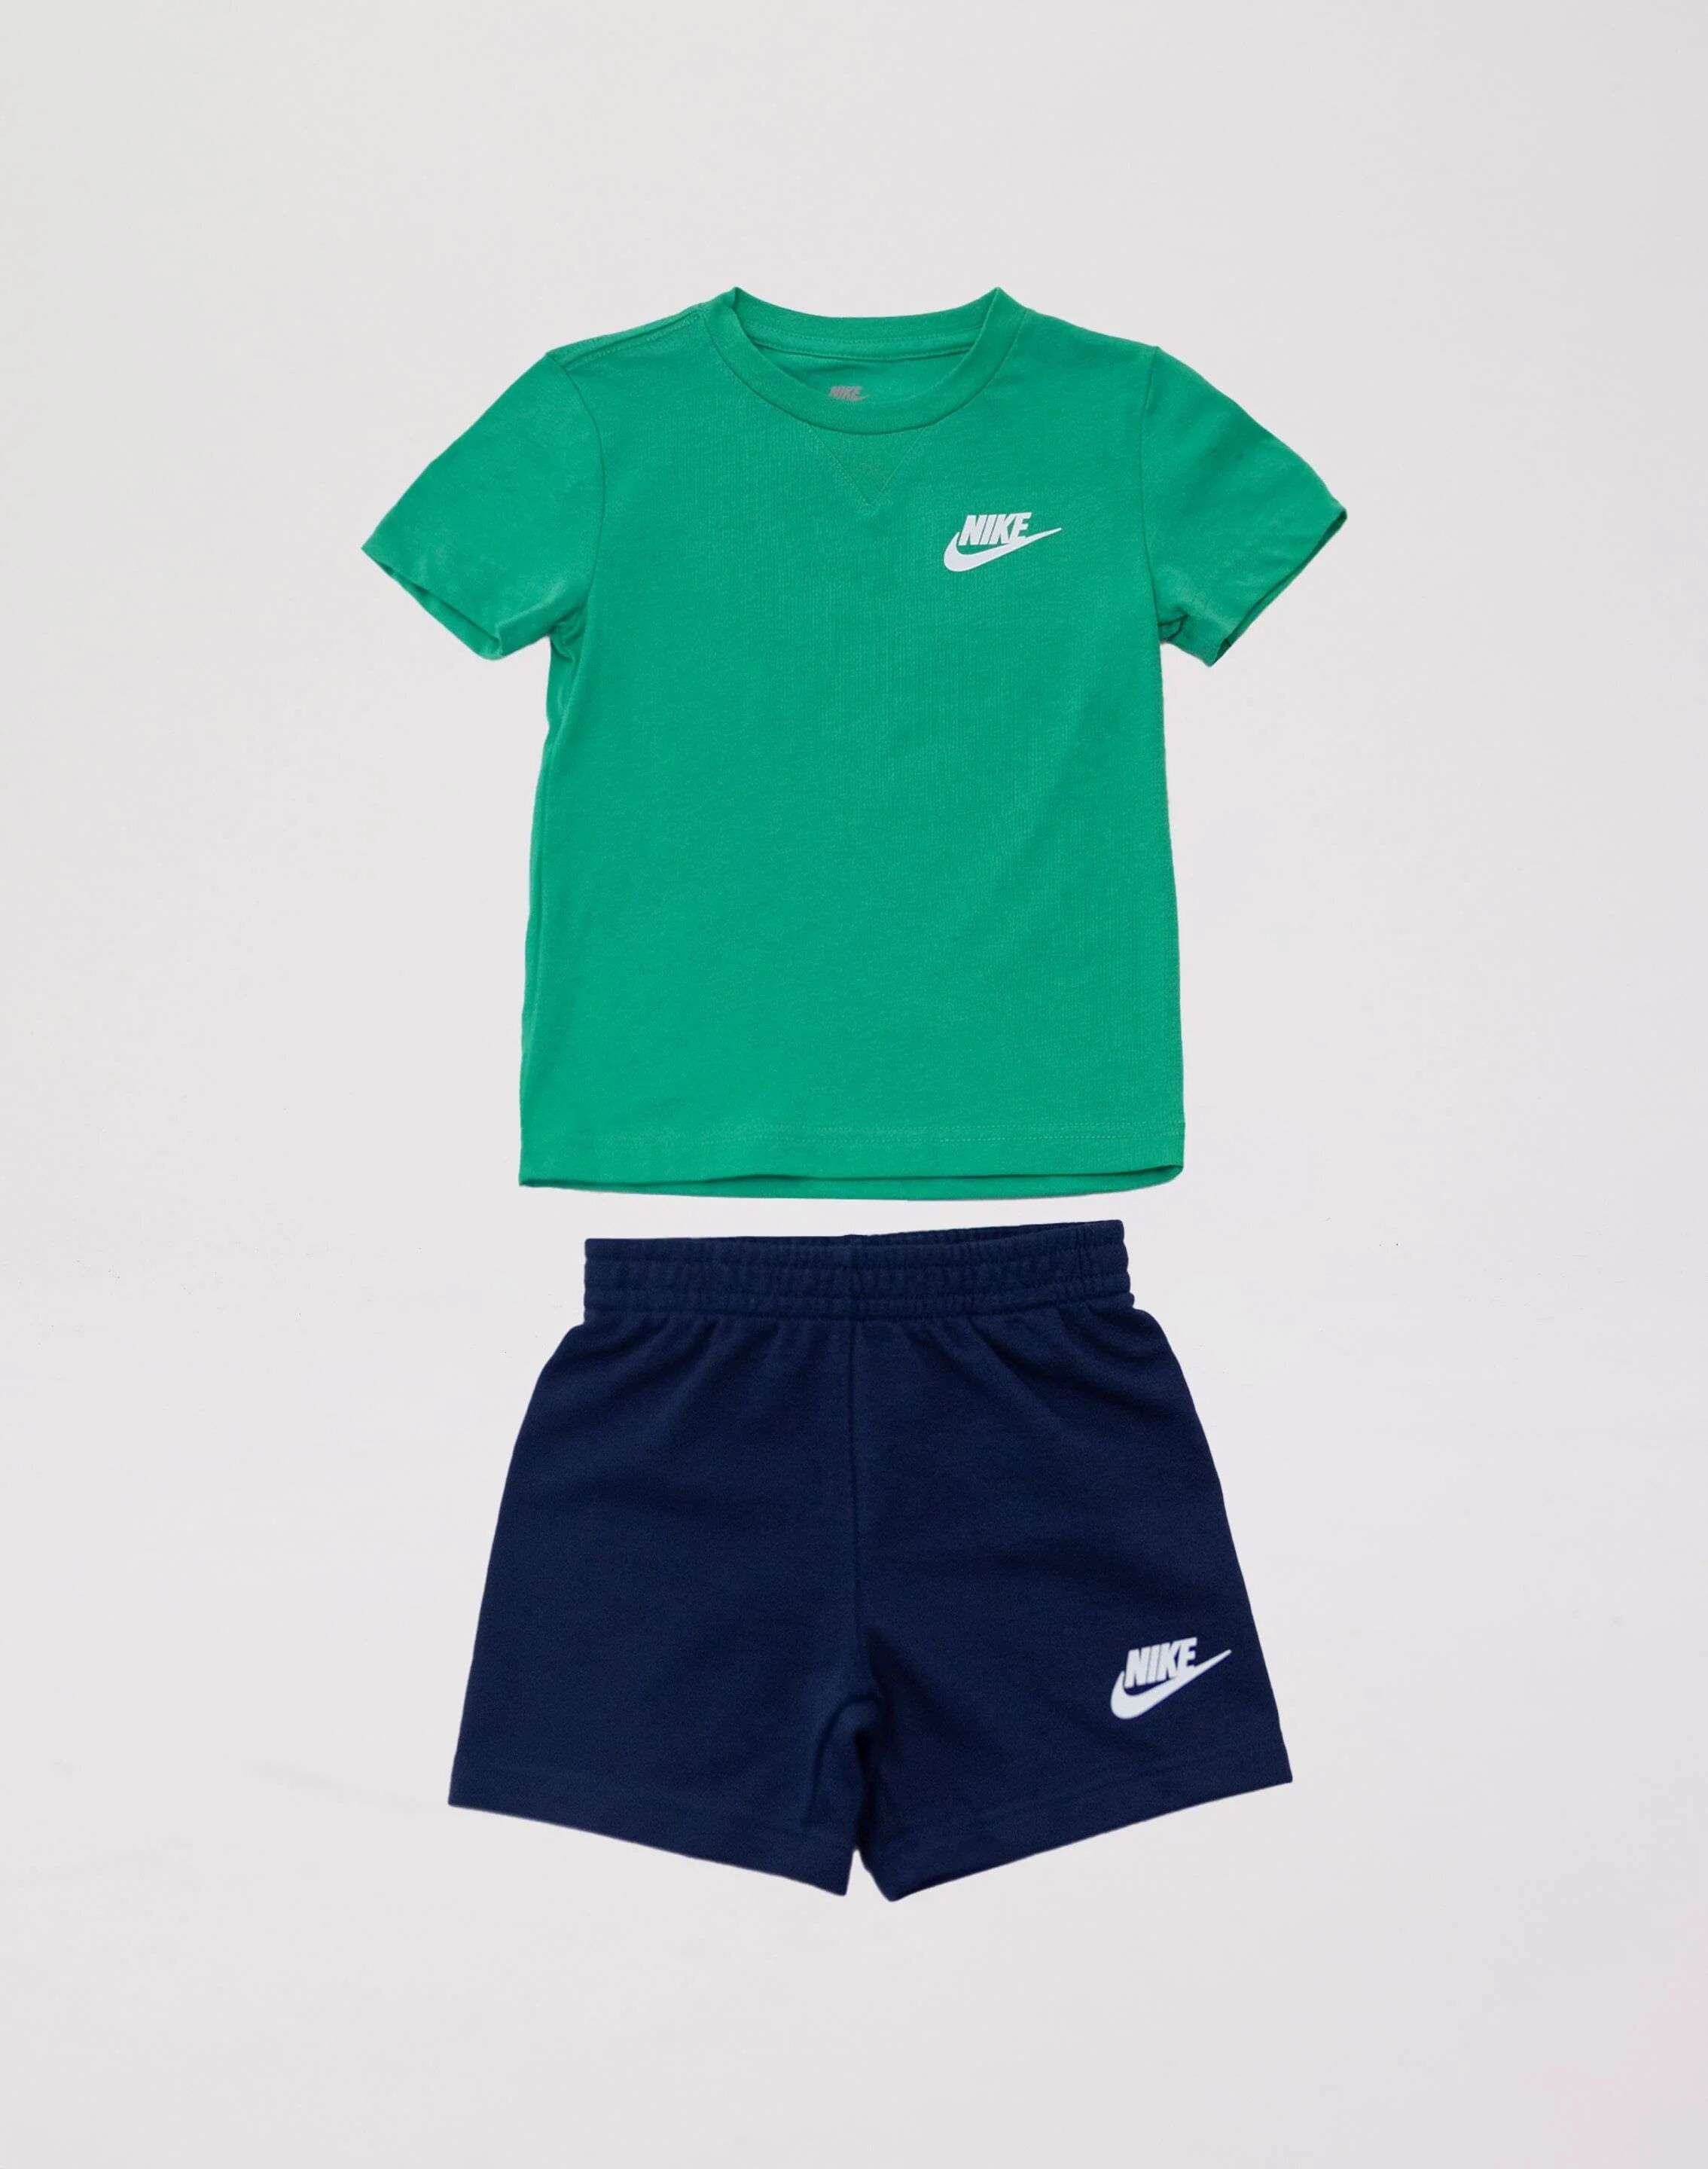 Nike French Terry Shorts Set Pre-School  - Green - Size: 5